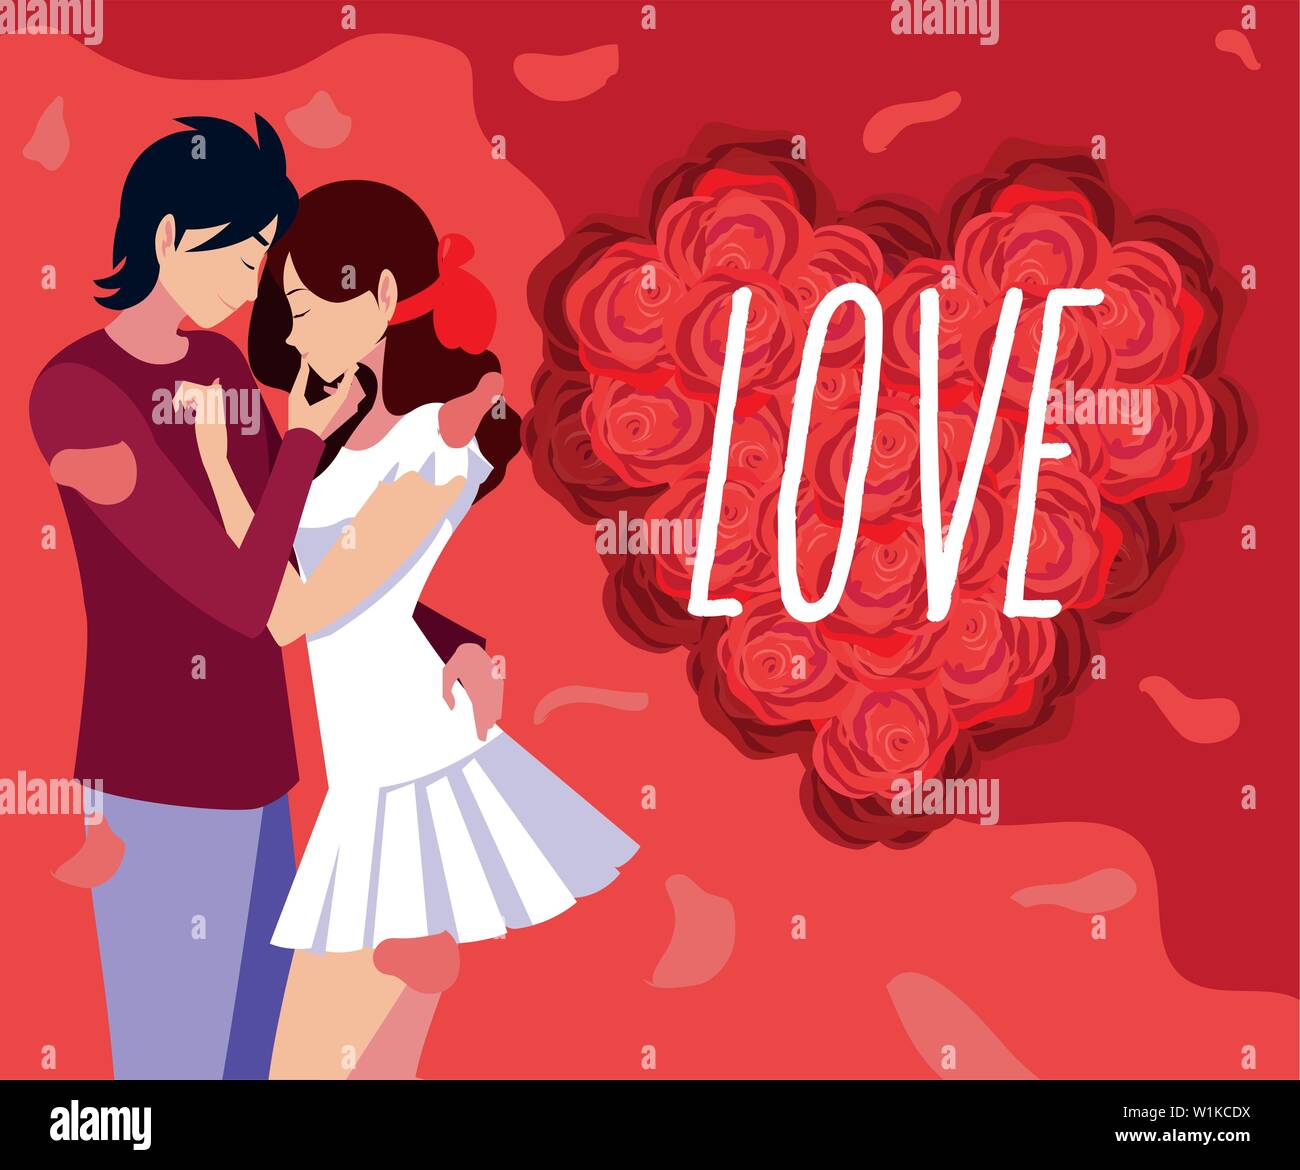 Vector Design For Young Couple, Card Or Poster With Profile